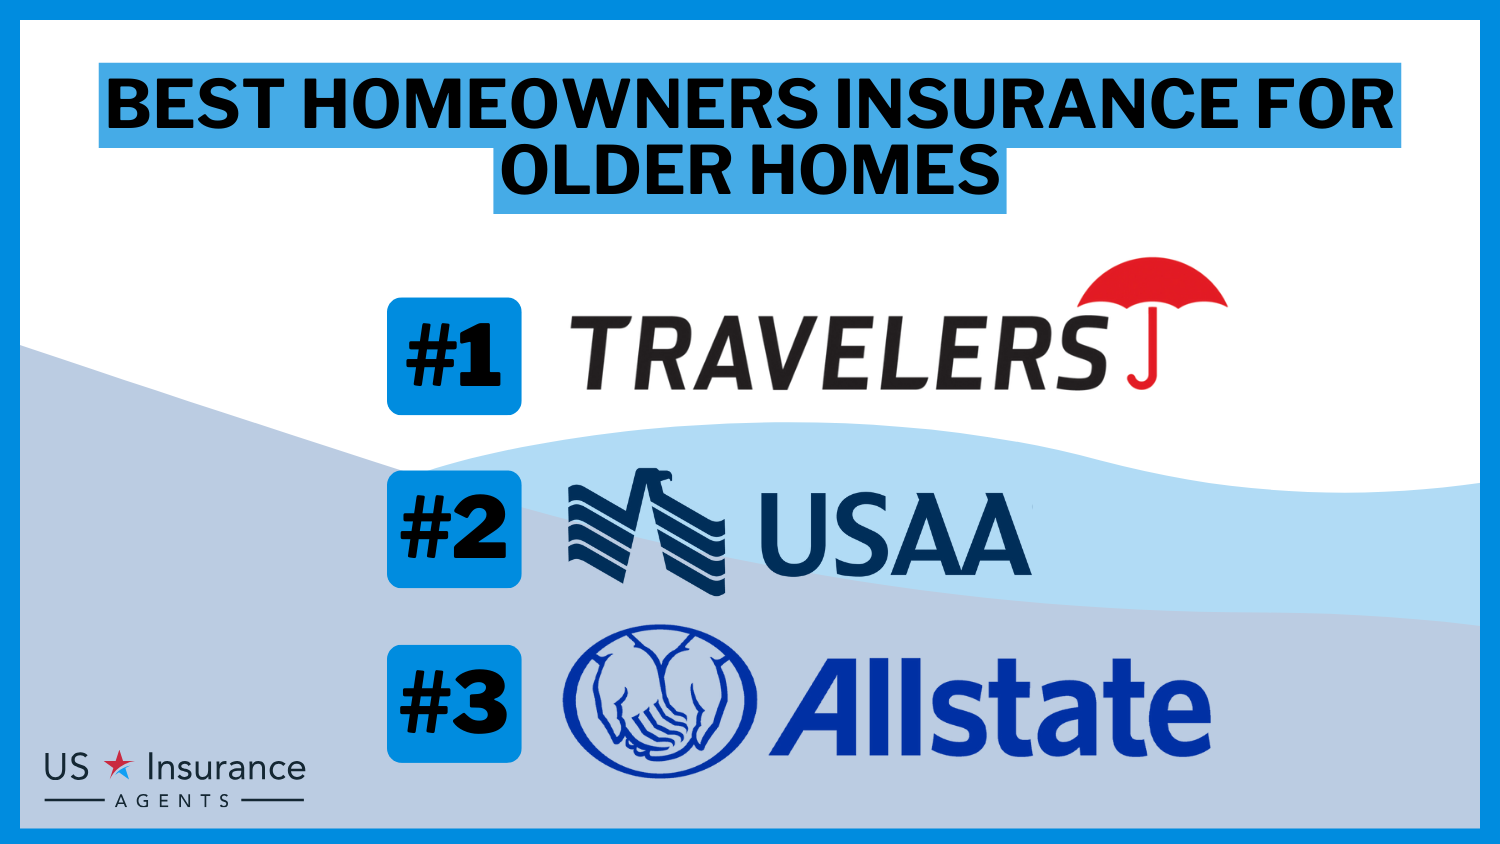 Best Homeowners Insurance for Older Homes: Travelers, USAA, and Allstate